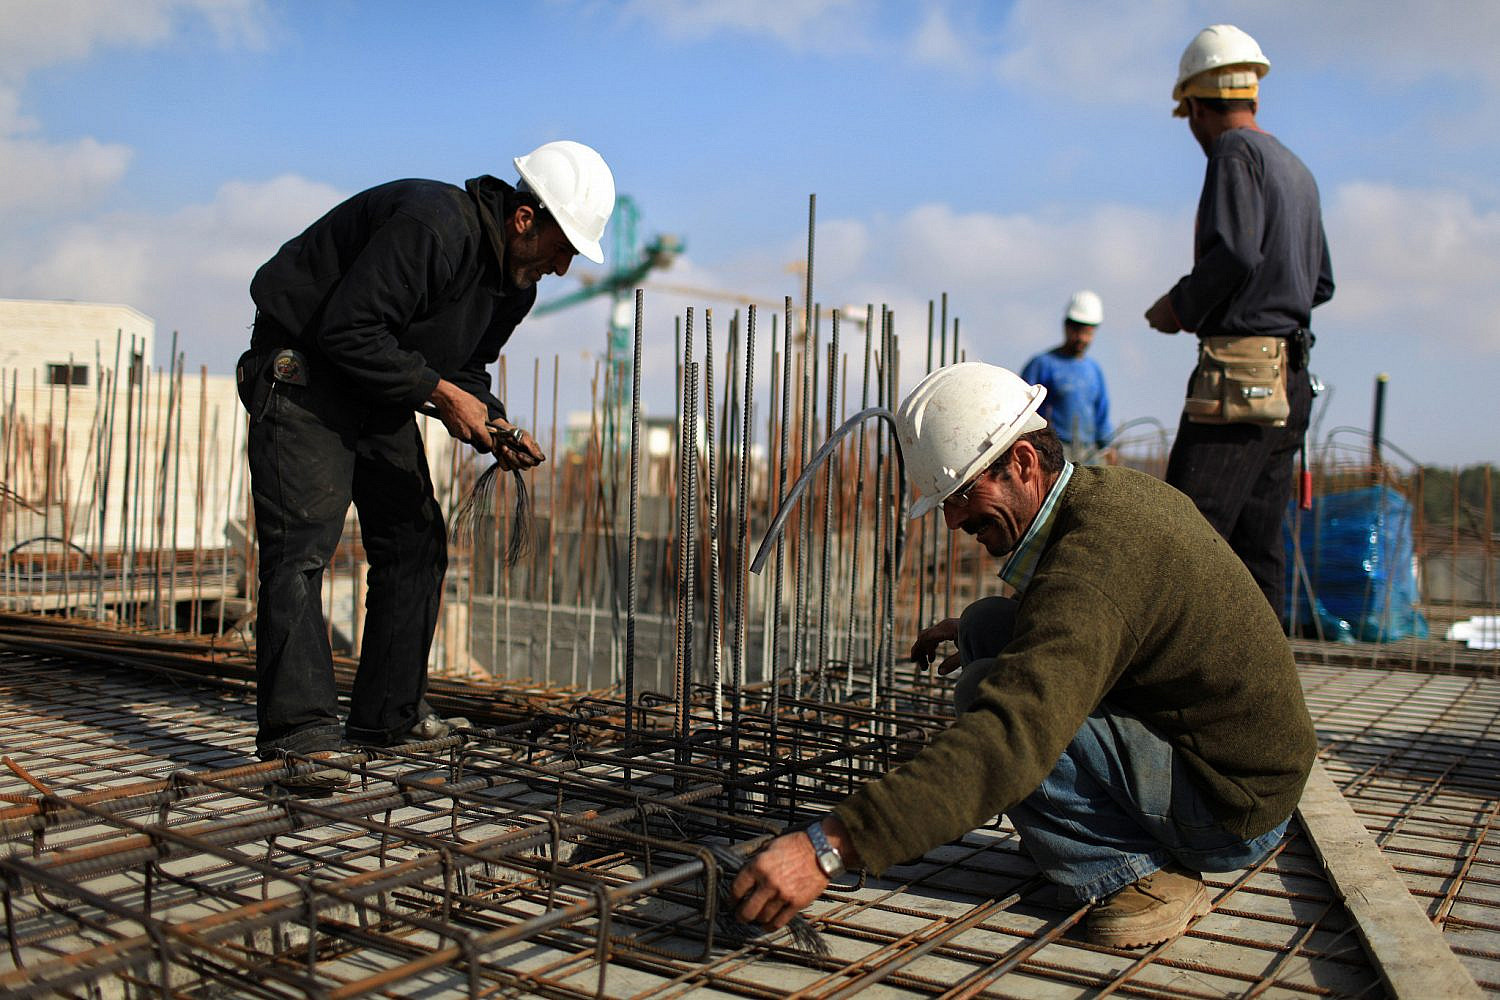 Palestinians work at a housing construction site in the Jewish settlement of Har Homa in East Jerusalem, Nov 26, 2009. (Kobi Gideon/Flash90)